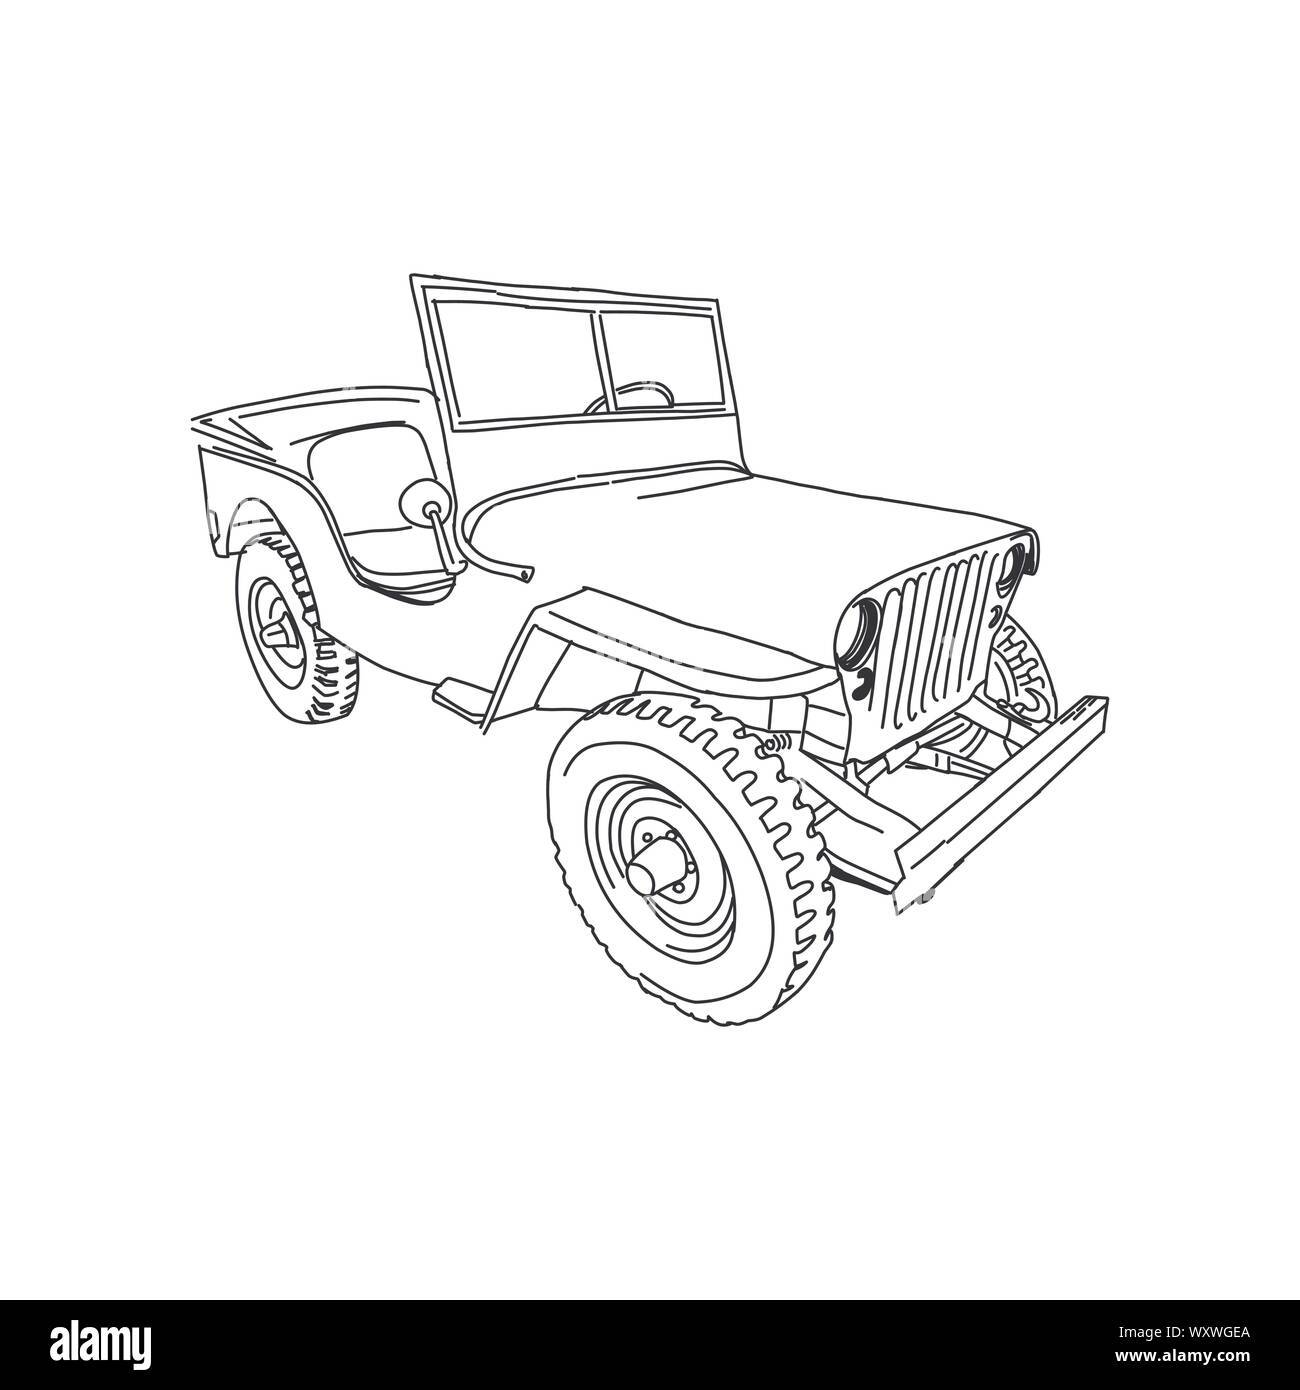 Military vehicle jeep army vector line art Hand drawn illustration Stock Vector